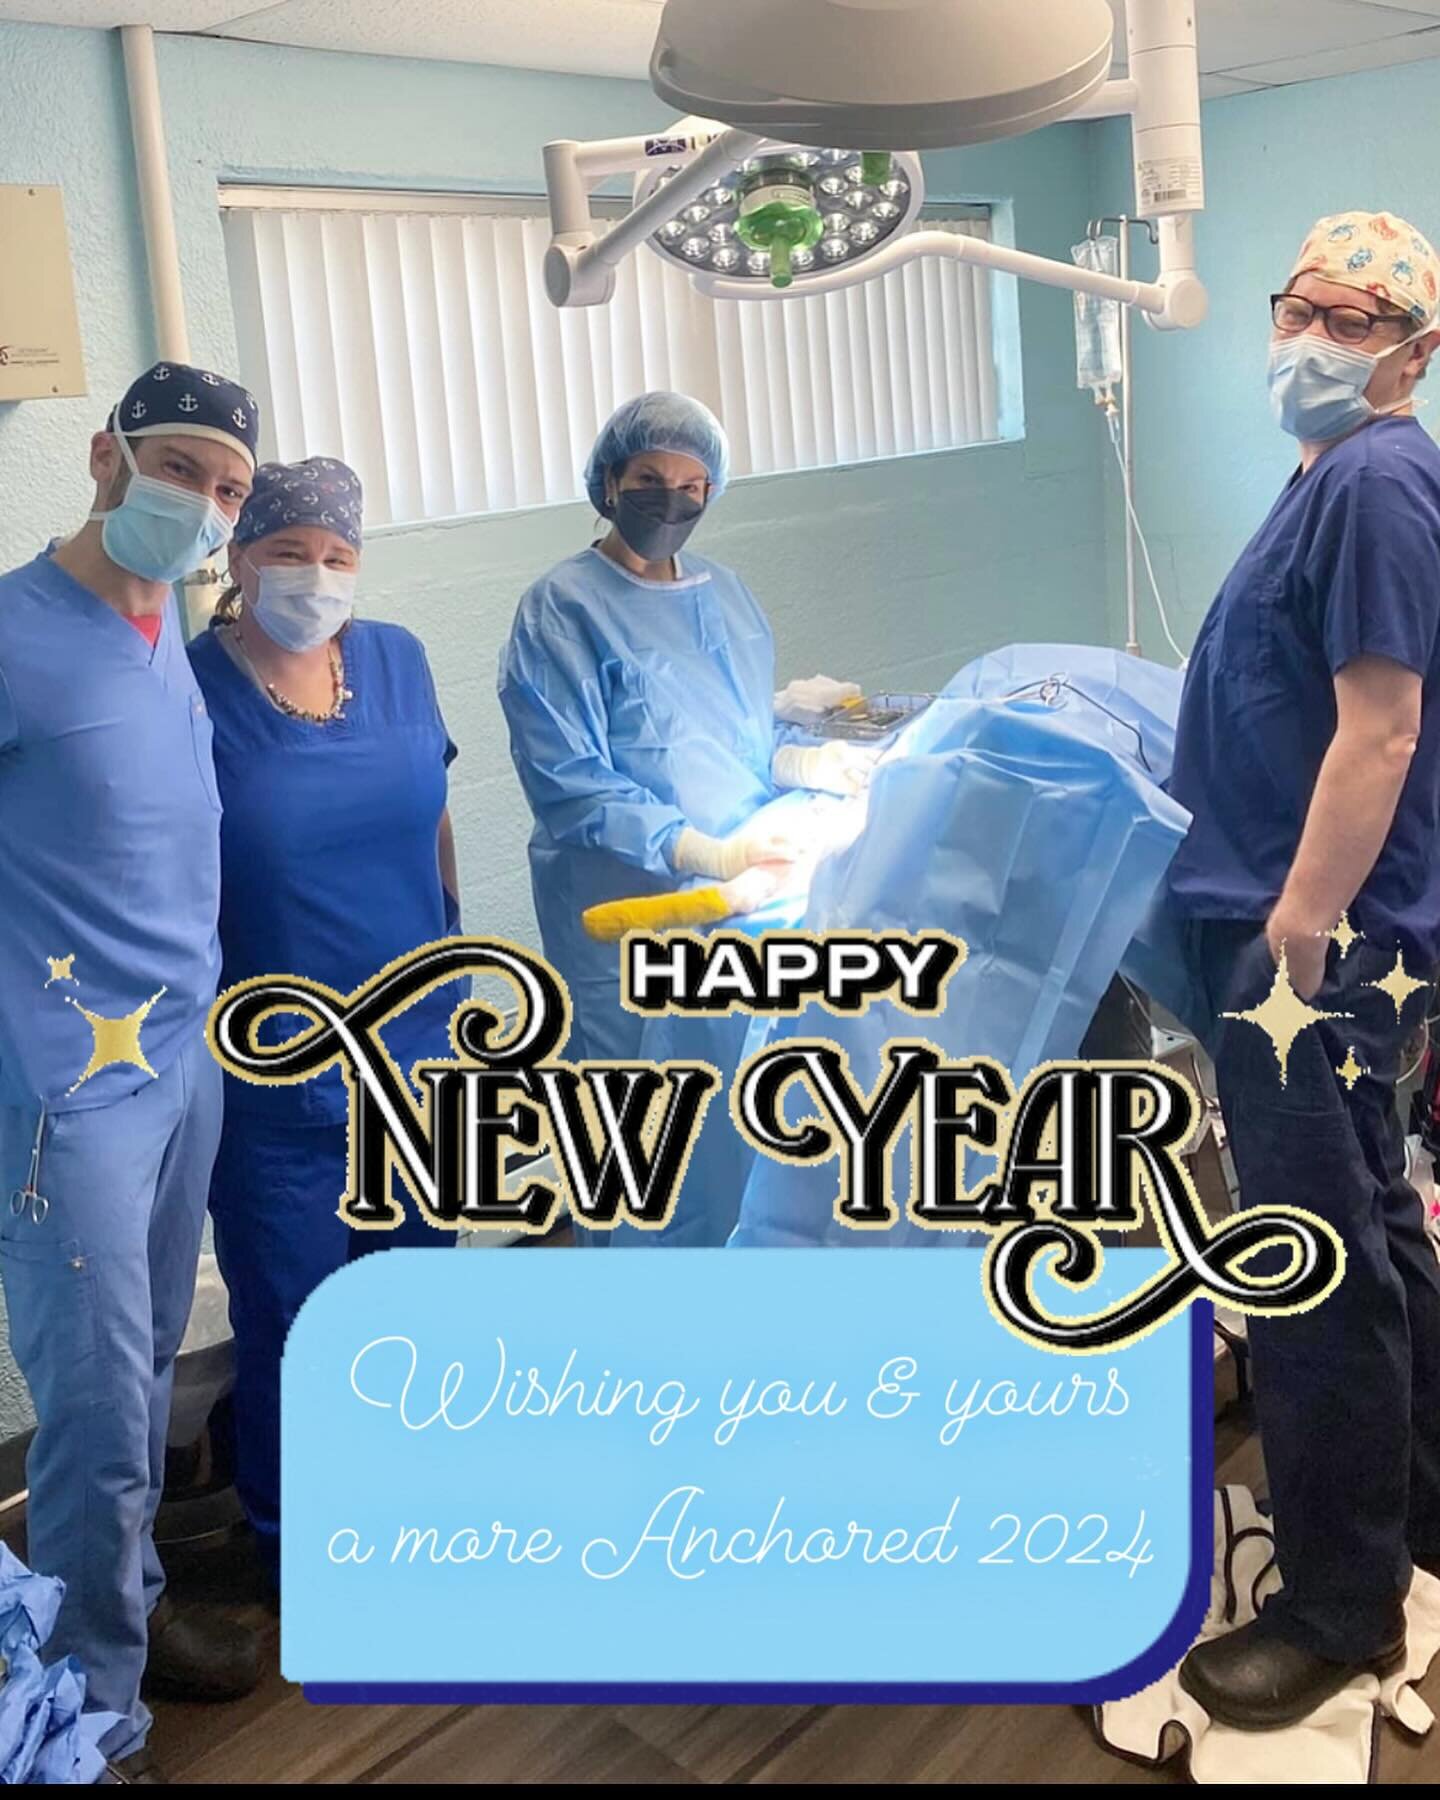 2023 was an exciting year of connection &amp; growth for Anchor! 

After 3 years of troubleshooting pandemic, health issues, non-compete, etc while doing mobile surgery, we were FINALLY free to practice without extreme limitations!

This was an &ldqu